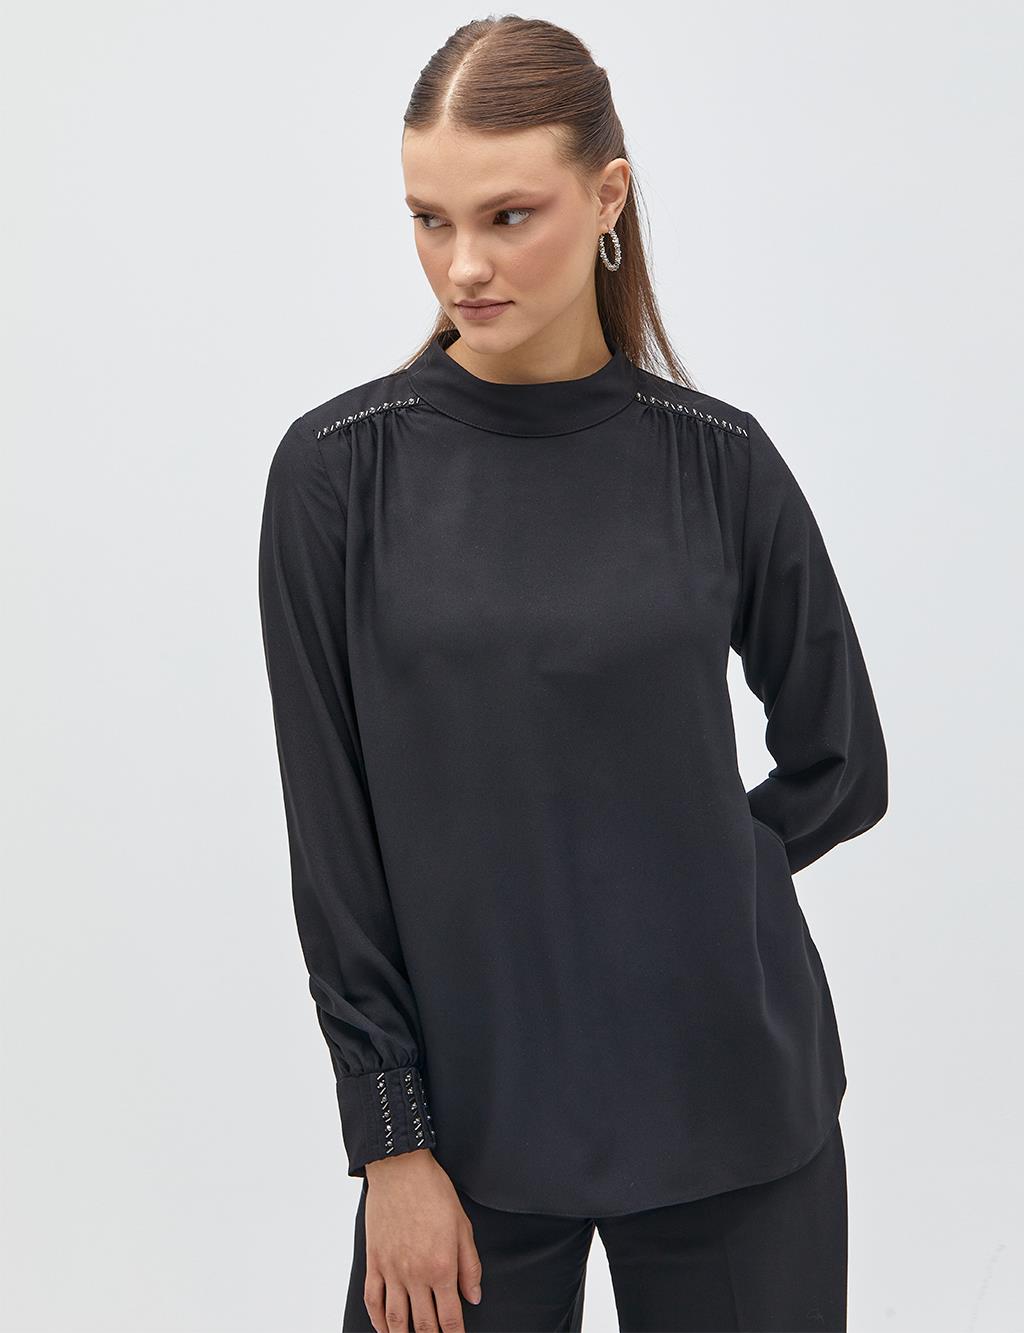 Black Blouse with Stones on the Shoulders and Wrists